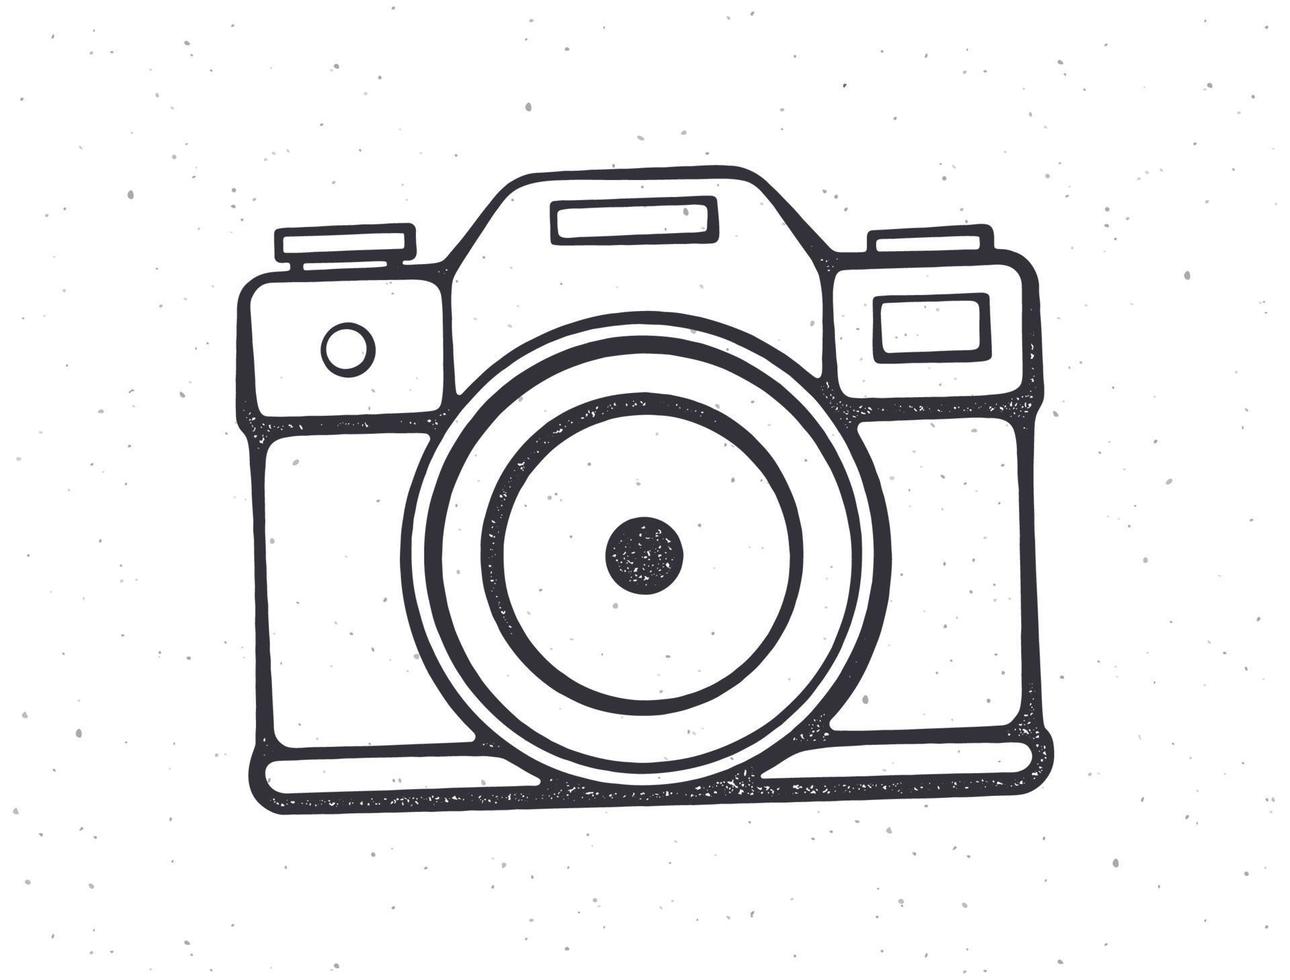 Outline of retro photo camera. Modern digital device with lens in vintage style. Vector illustration. Hand drawn black ink sketch, isolated on white background